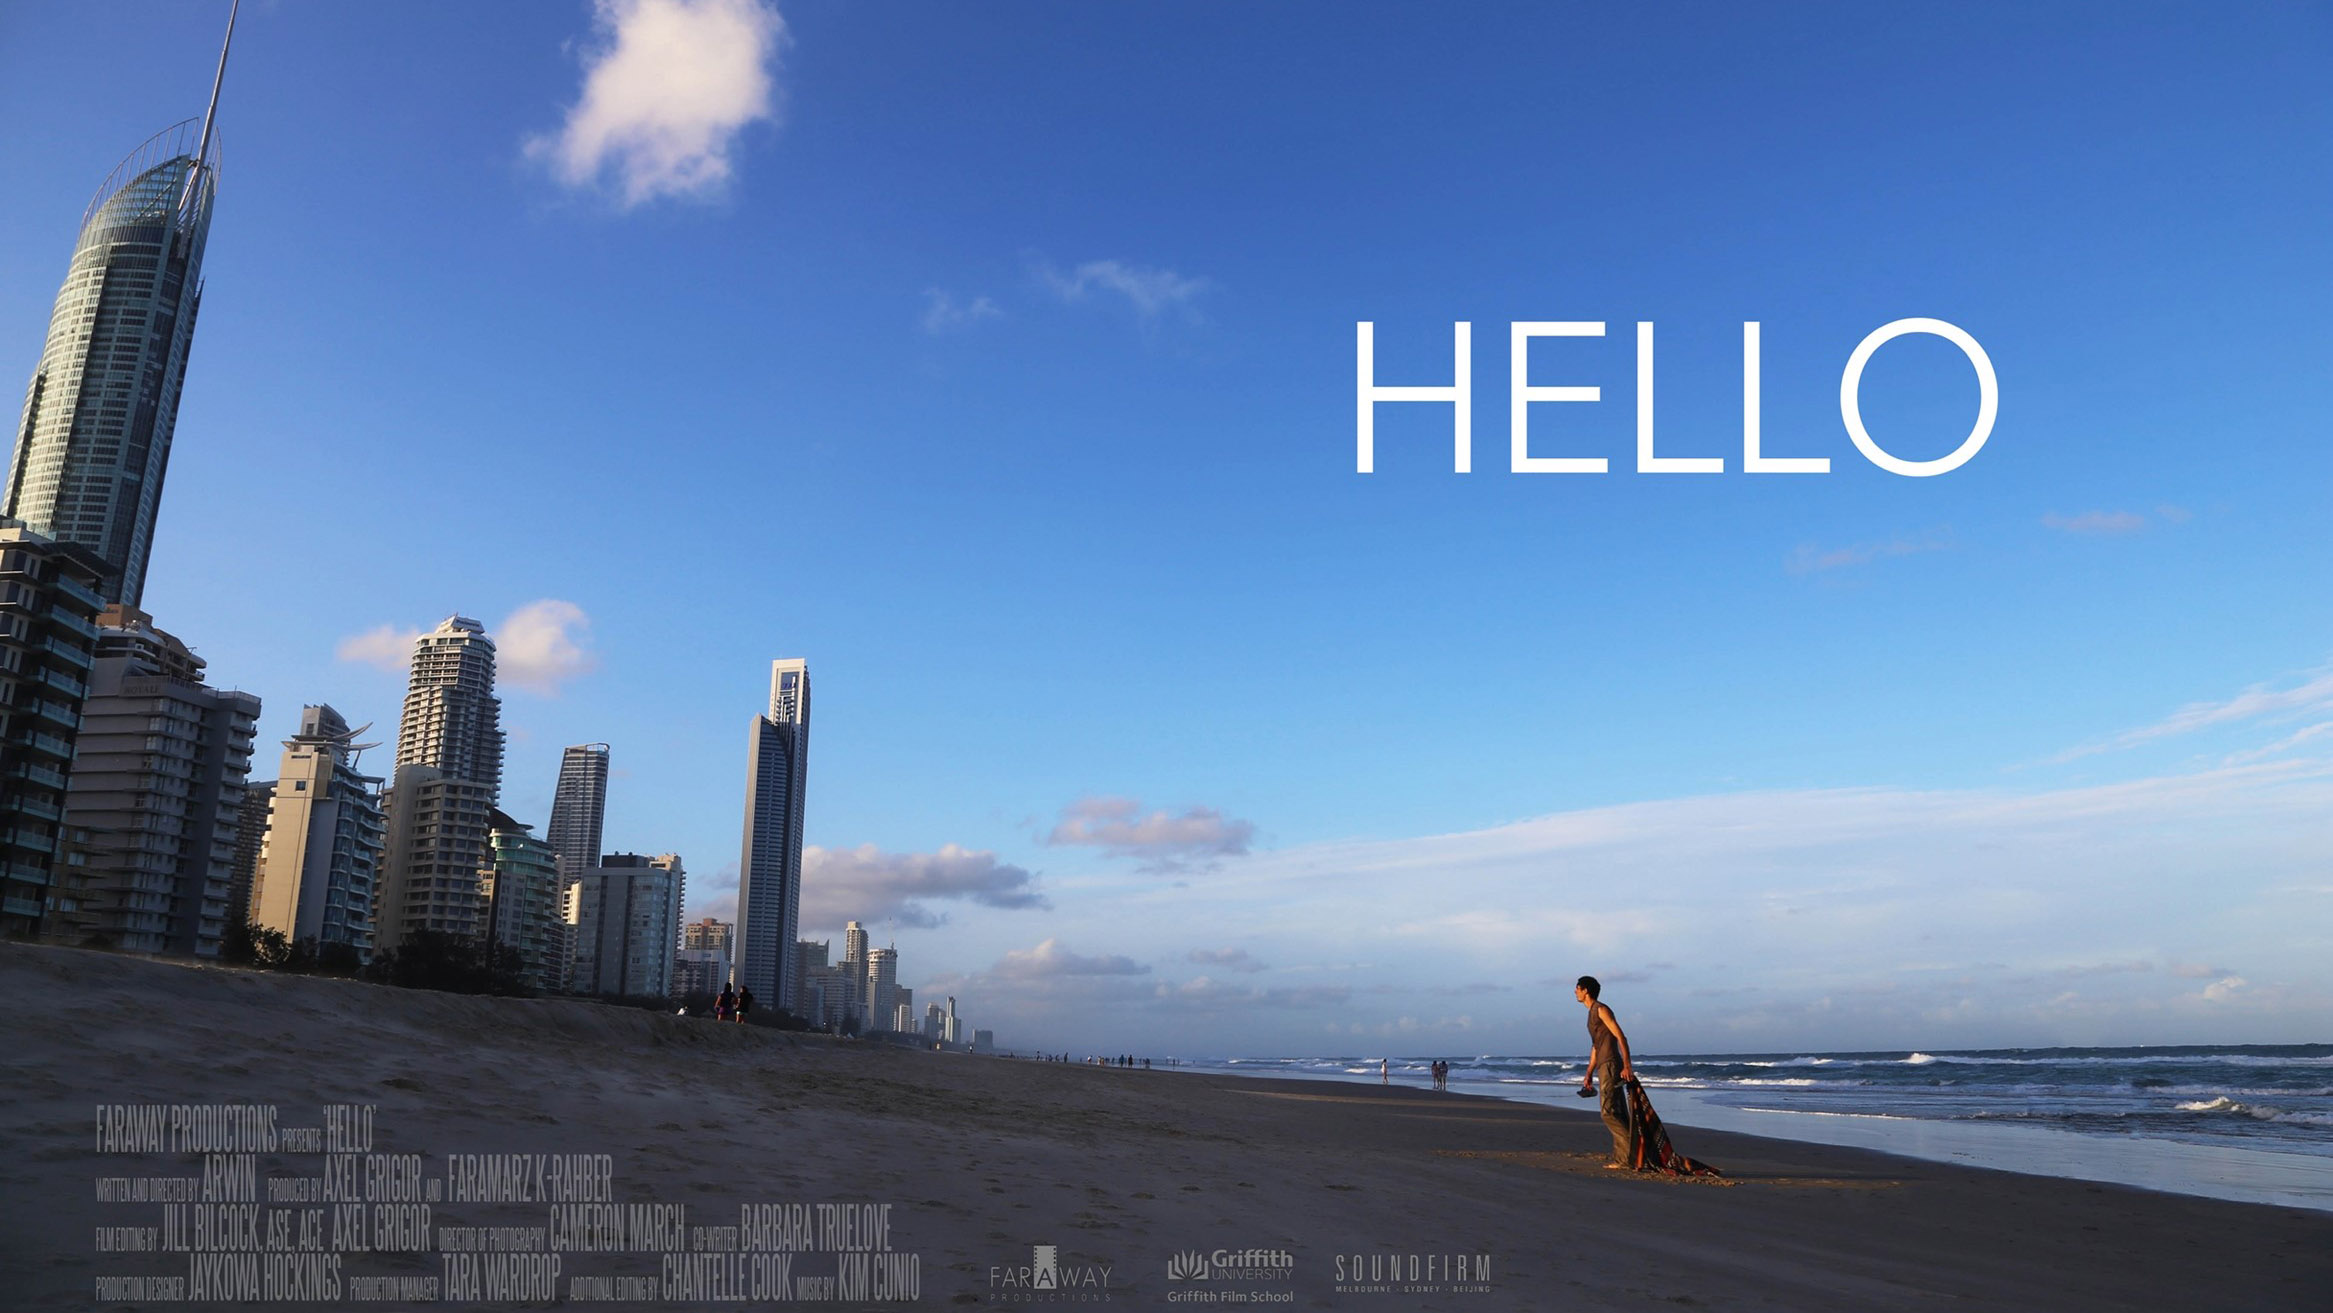 Hello: A visual portrayal of Director Arwin Arwin’s journey from Afghanistan to Australia. Arwin makes a momentous decision in the search for freedom and hopes for a better future, experiencing his own personal rites of passage and developing a new sense of maturity. Director Arwin Arwin